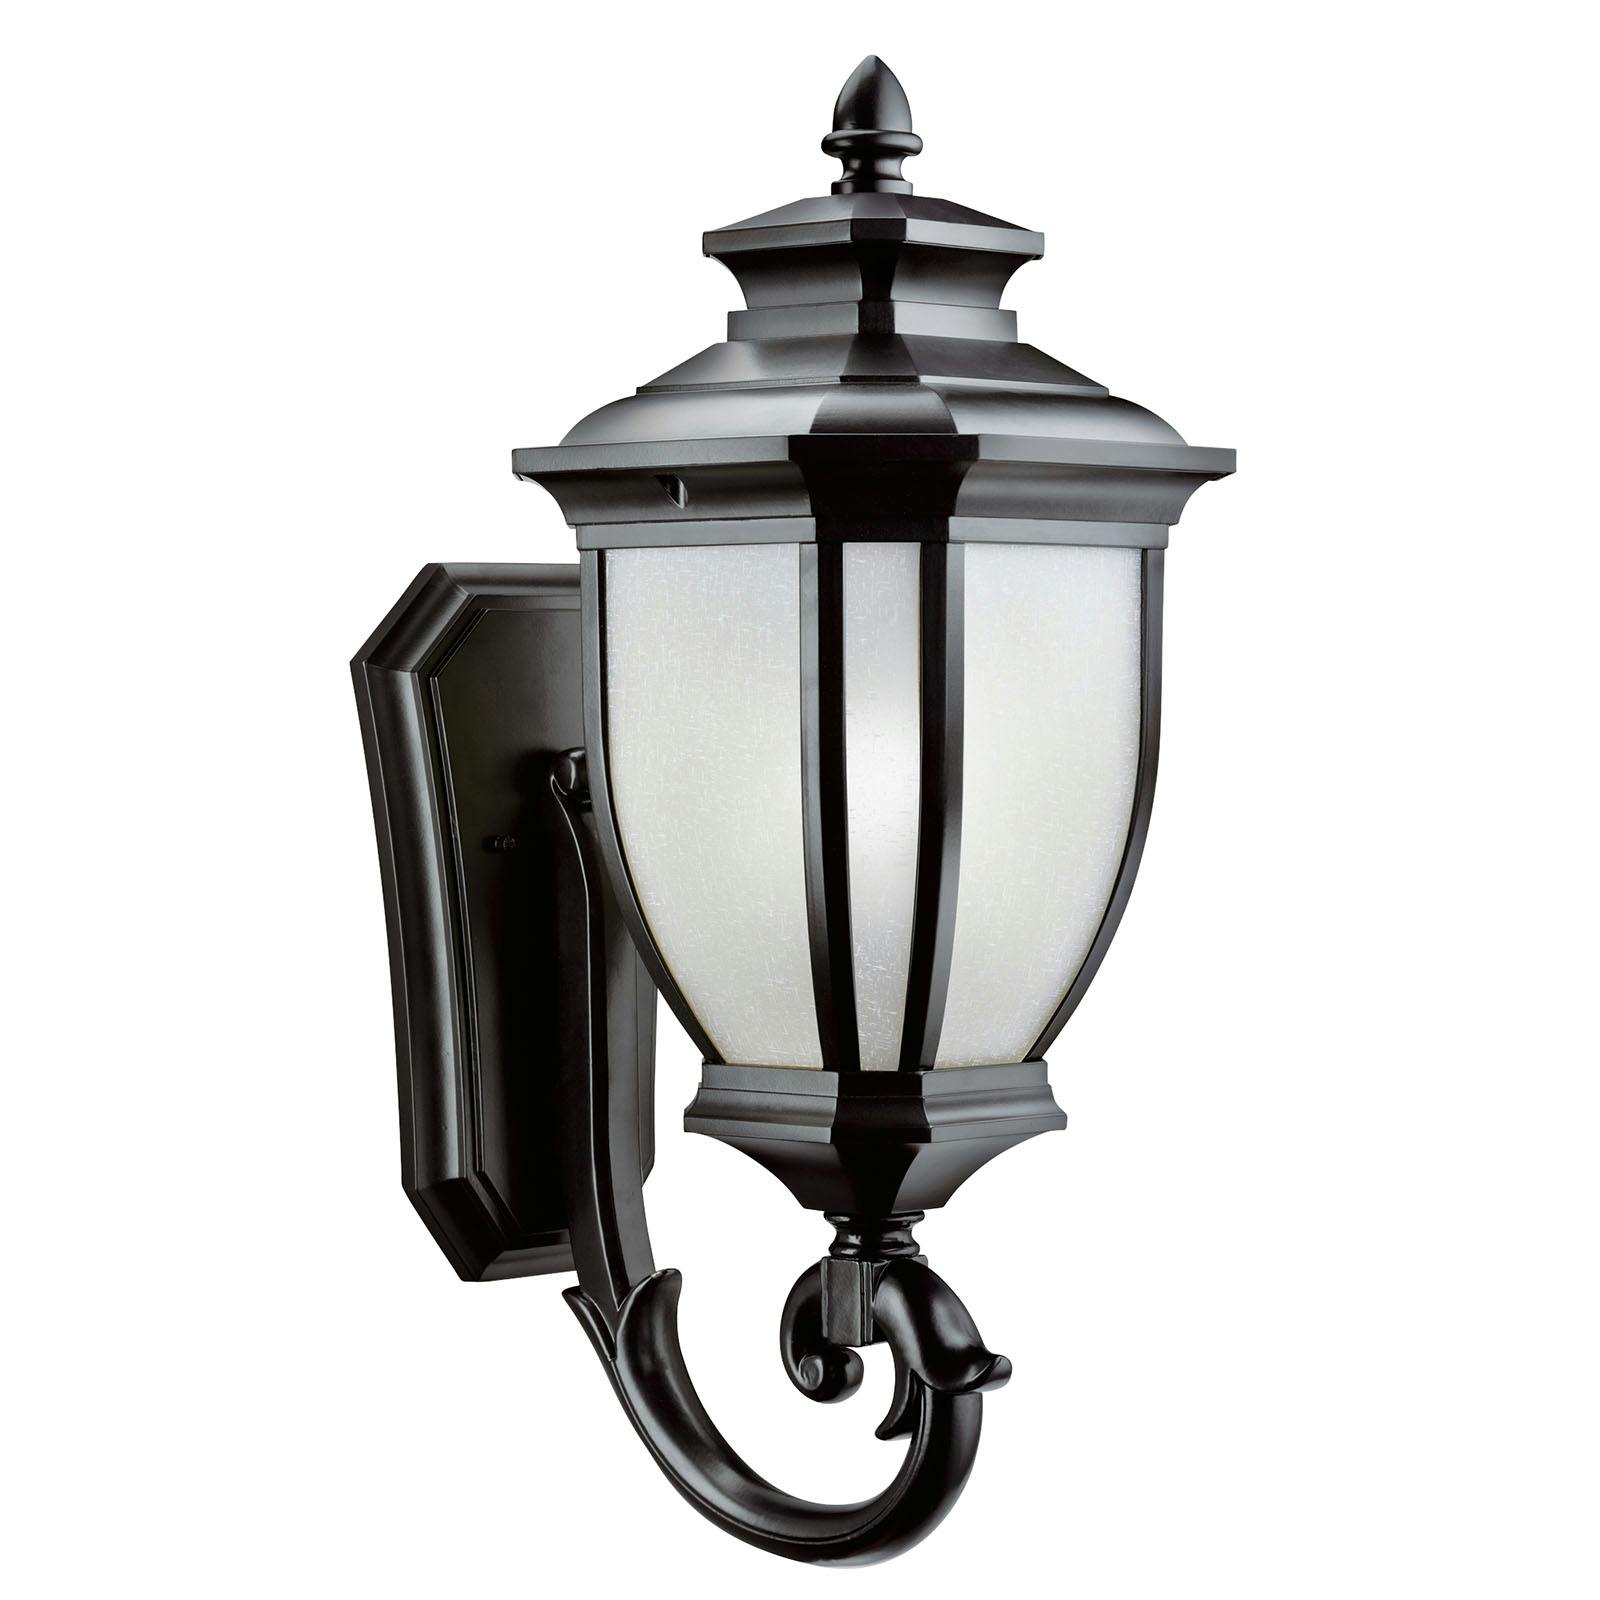 Salisbury 24.25" Wall Light in Black on a white background